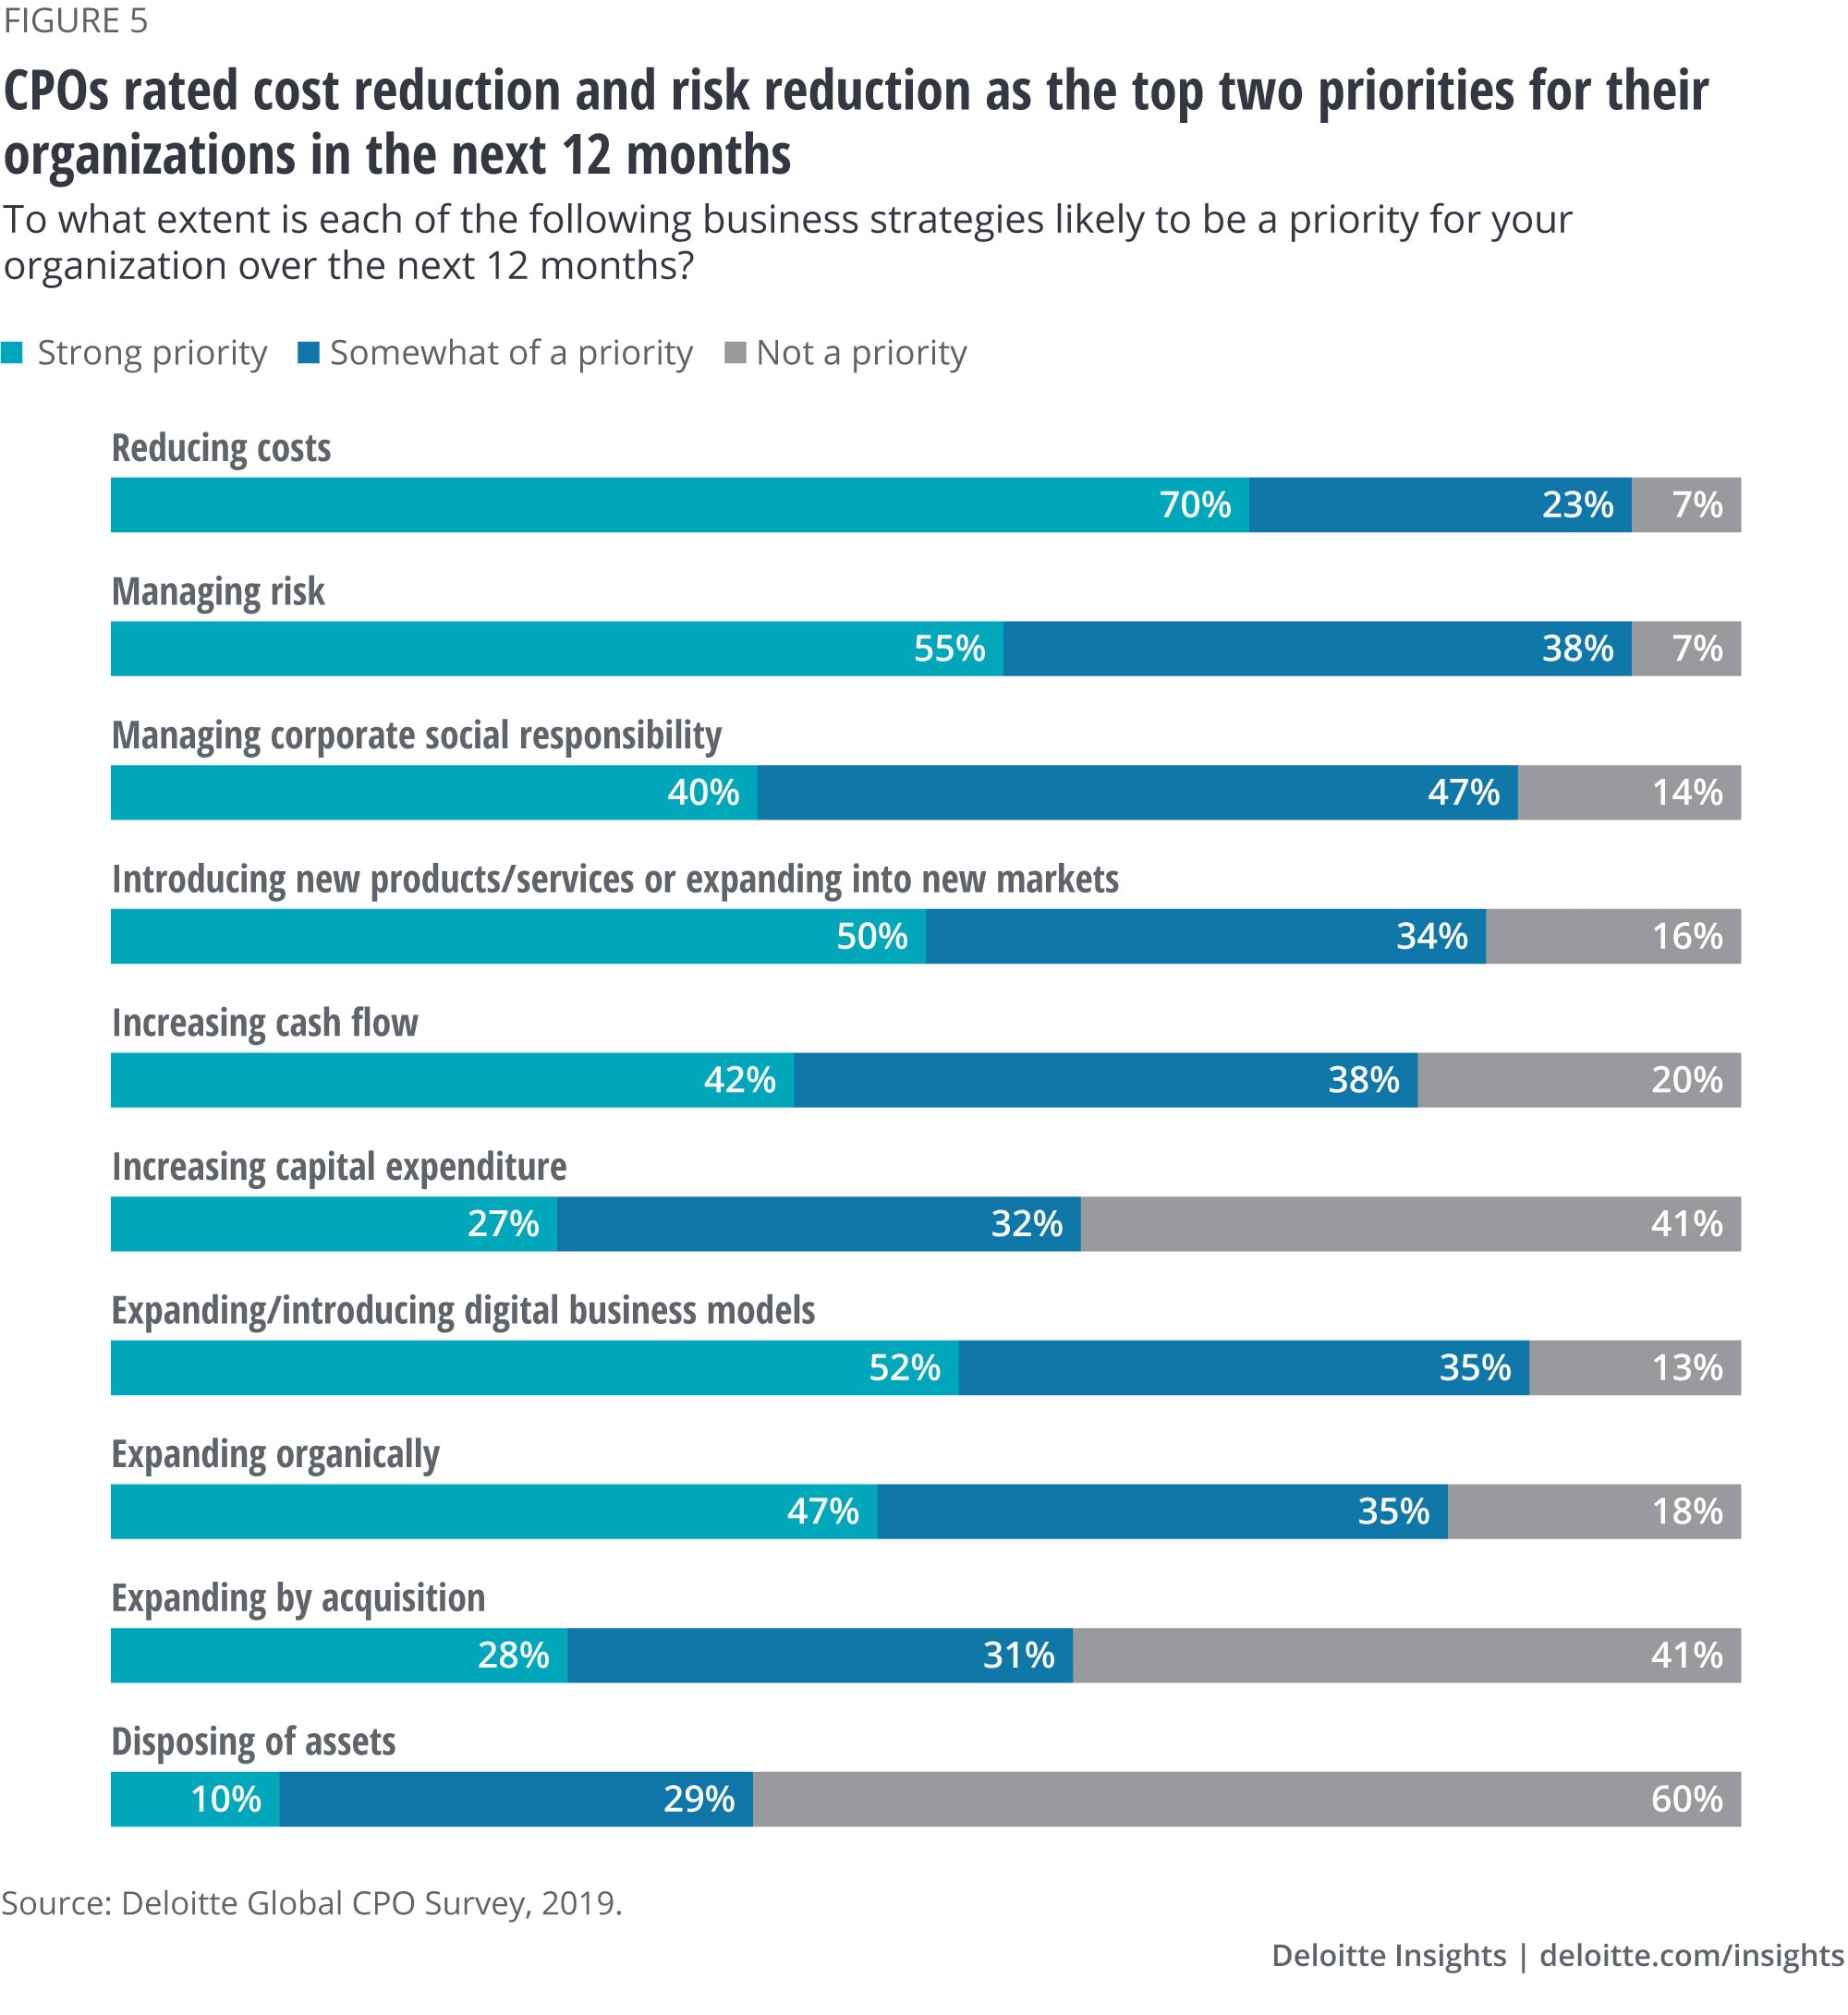 CPOs rated cost reduction and risk reduction as the top two priorities for their organizations in the next 12 months